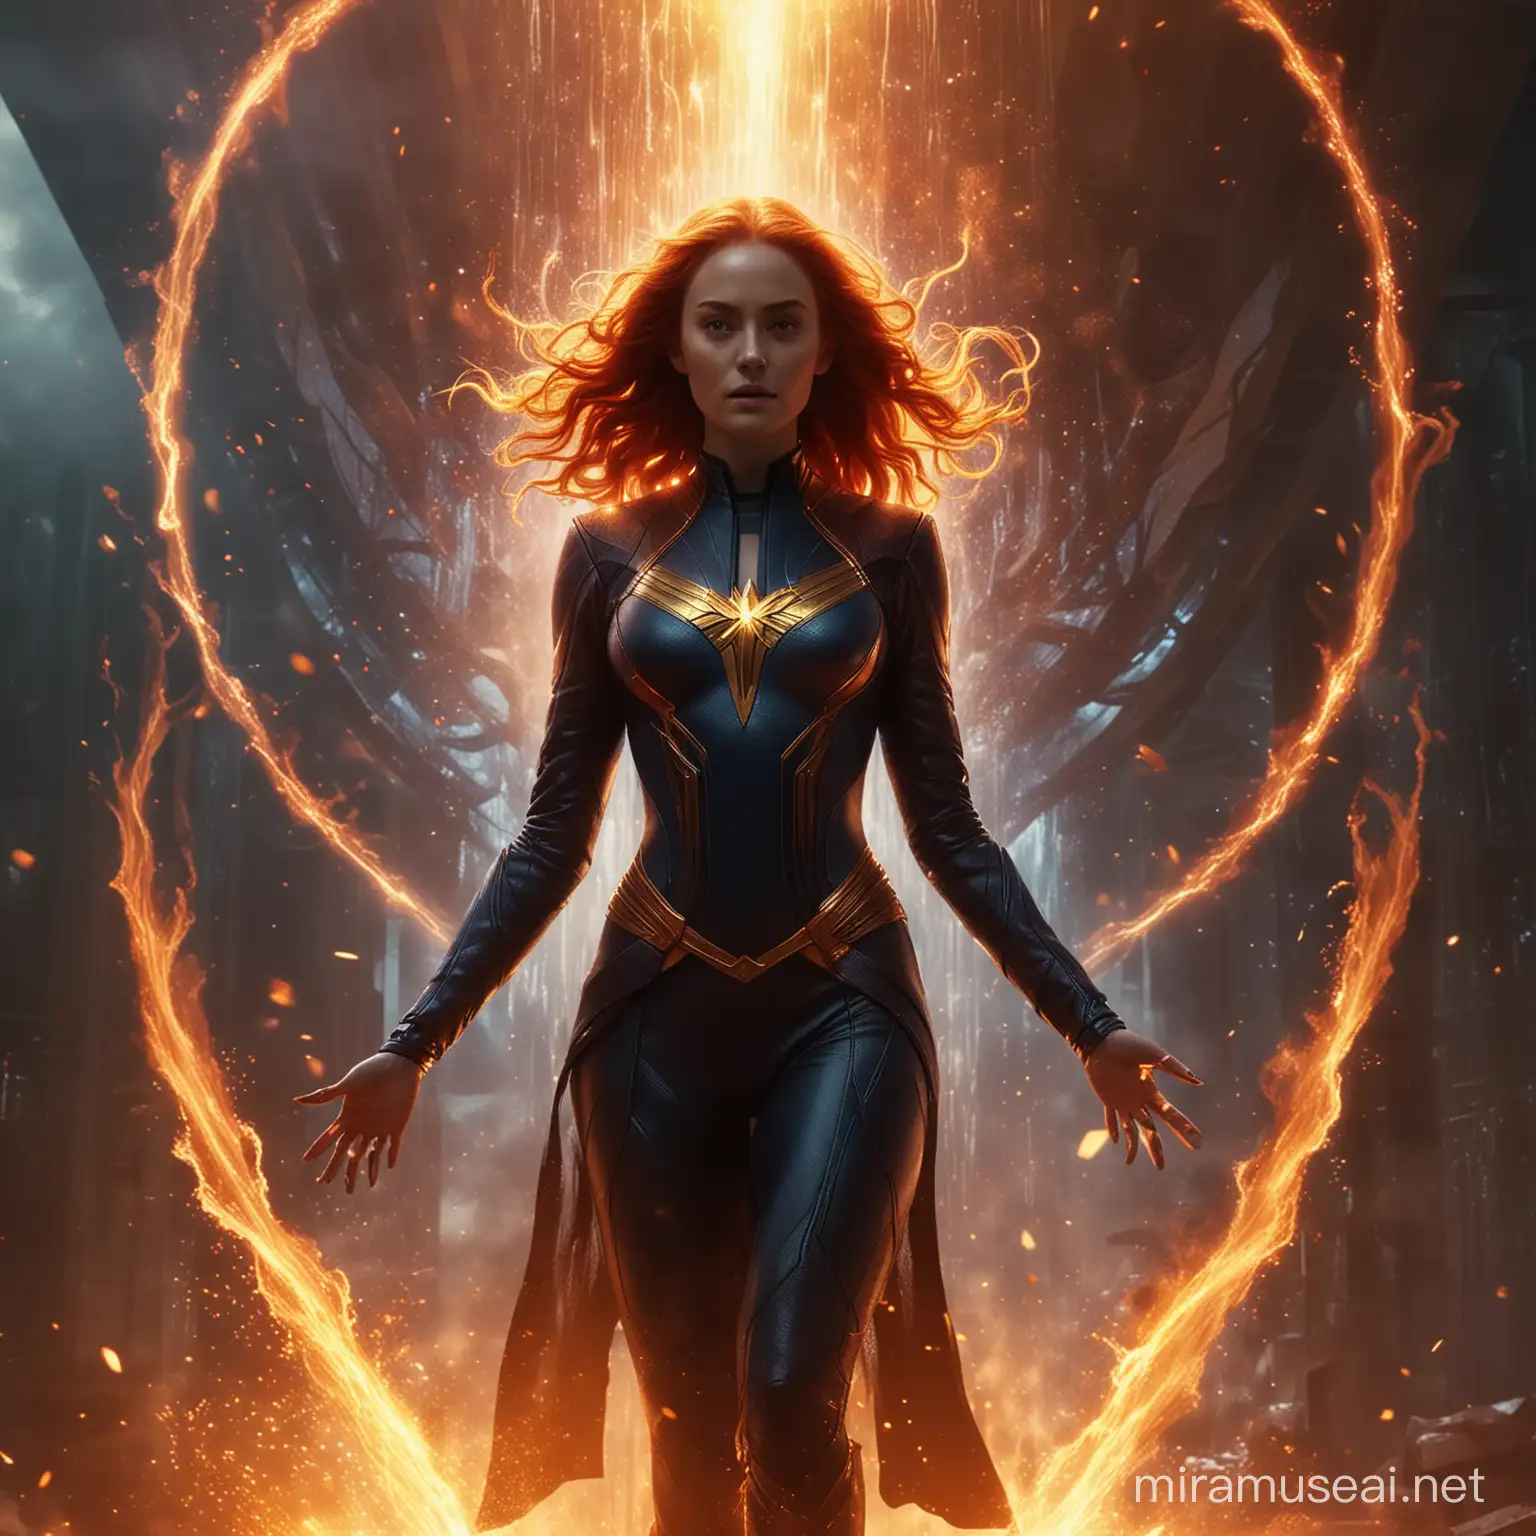 Dark Phoenix surrounded by a fiery aura, standing atop a celestial platform with energy tendrils cascading around her. The cinematic composition highlights the dynamic and dramatic nature of her transformation.